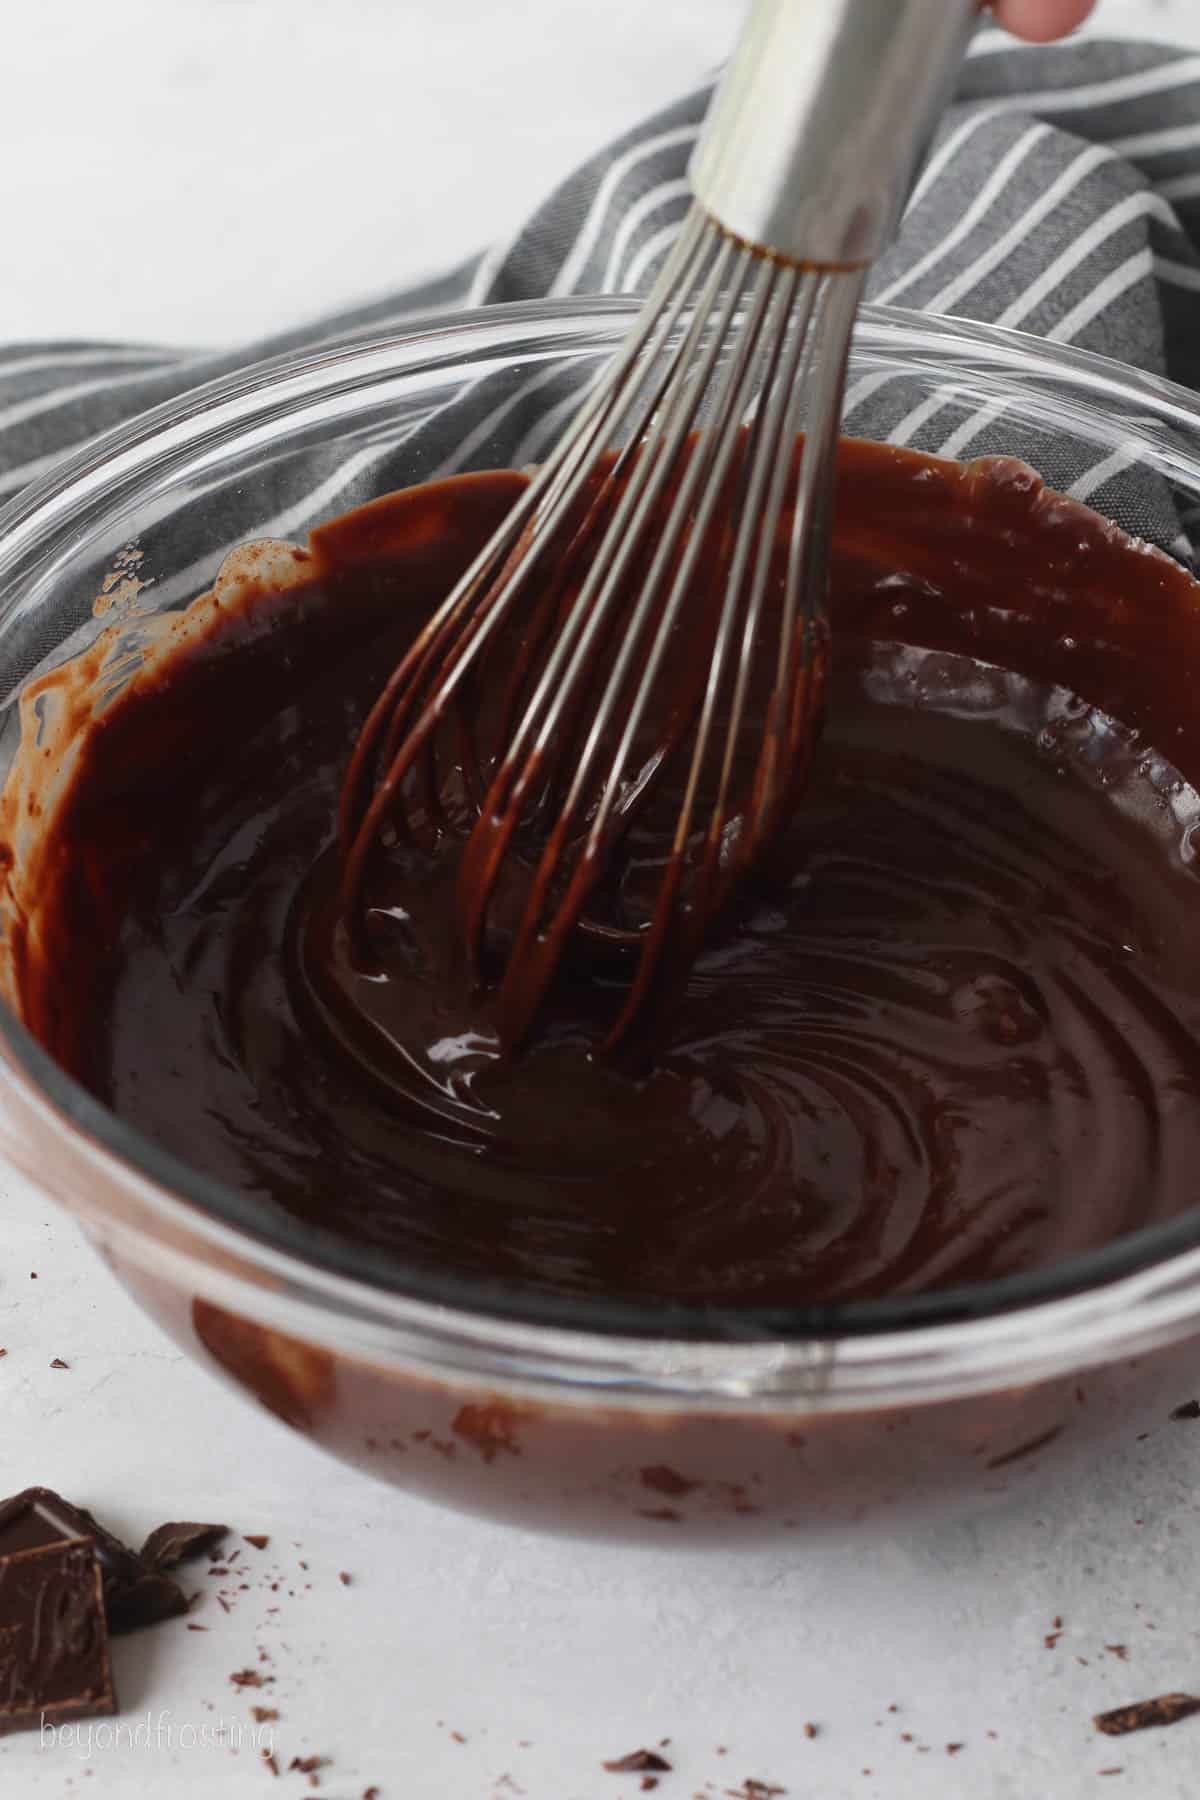 Chocolate and cream whisked together in a glass bowl to make chocolate ganache.